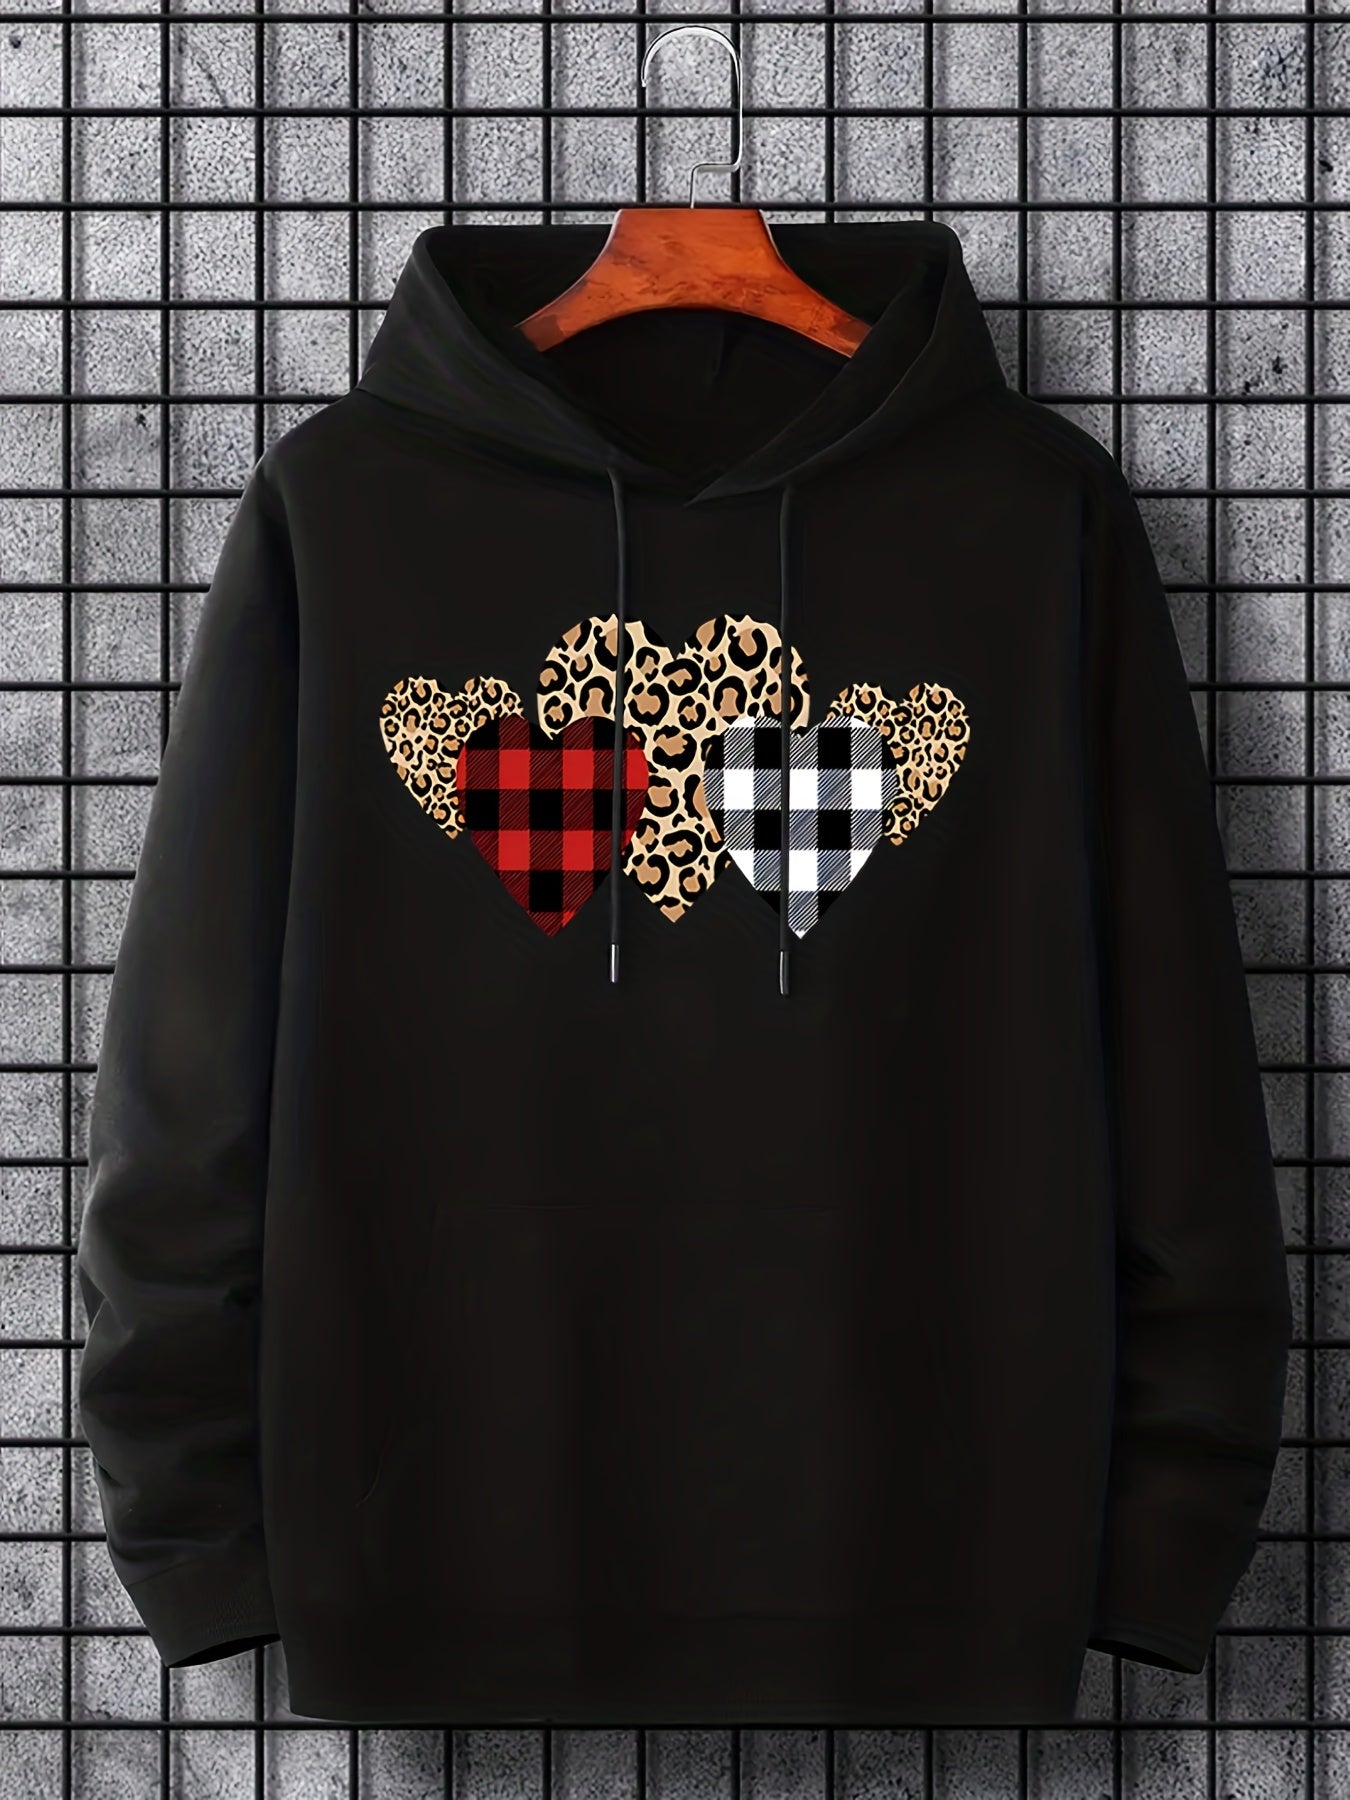 Hoodies For Men, Leopard Plaid Hearts Graphic Hoodie, Men's Casual Pullover Hooded Sweatshirt With Kangaroo Pocket For Spring Fall, As Gifts